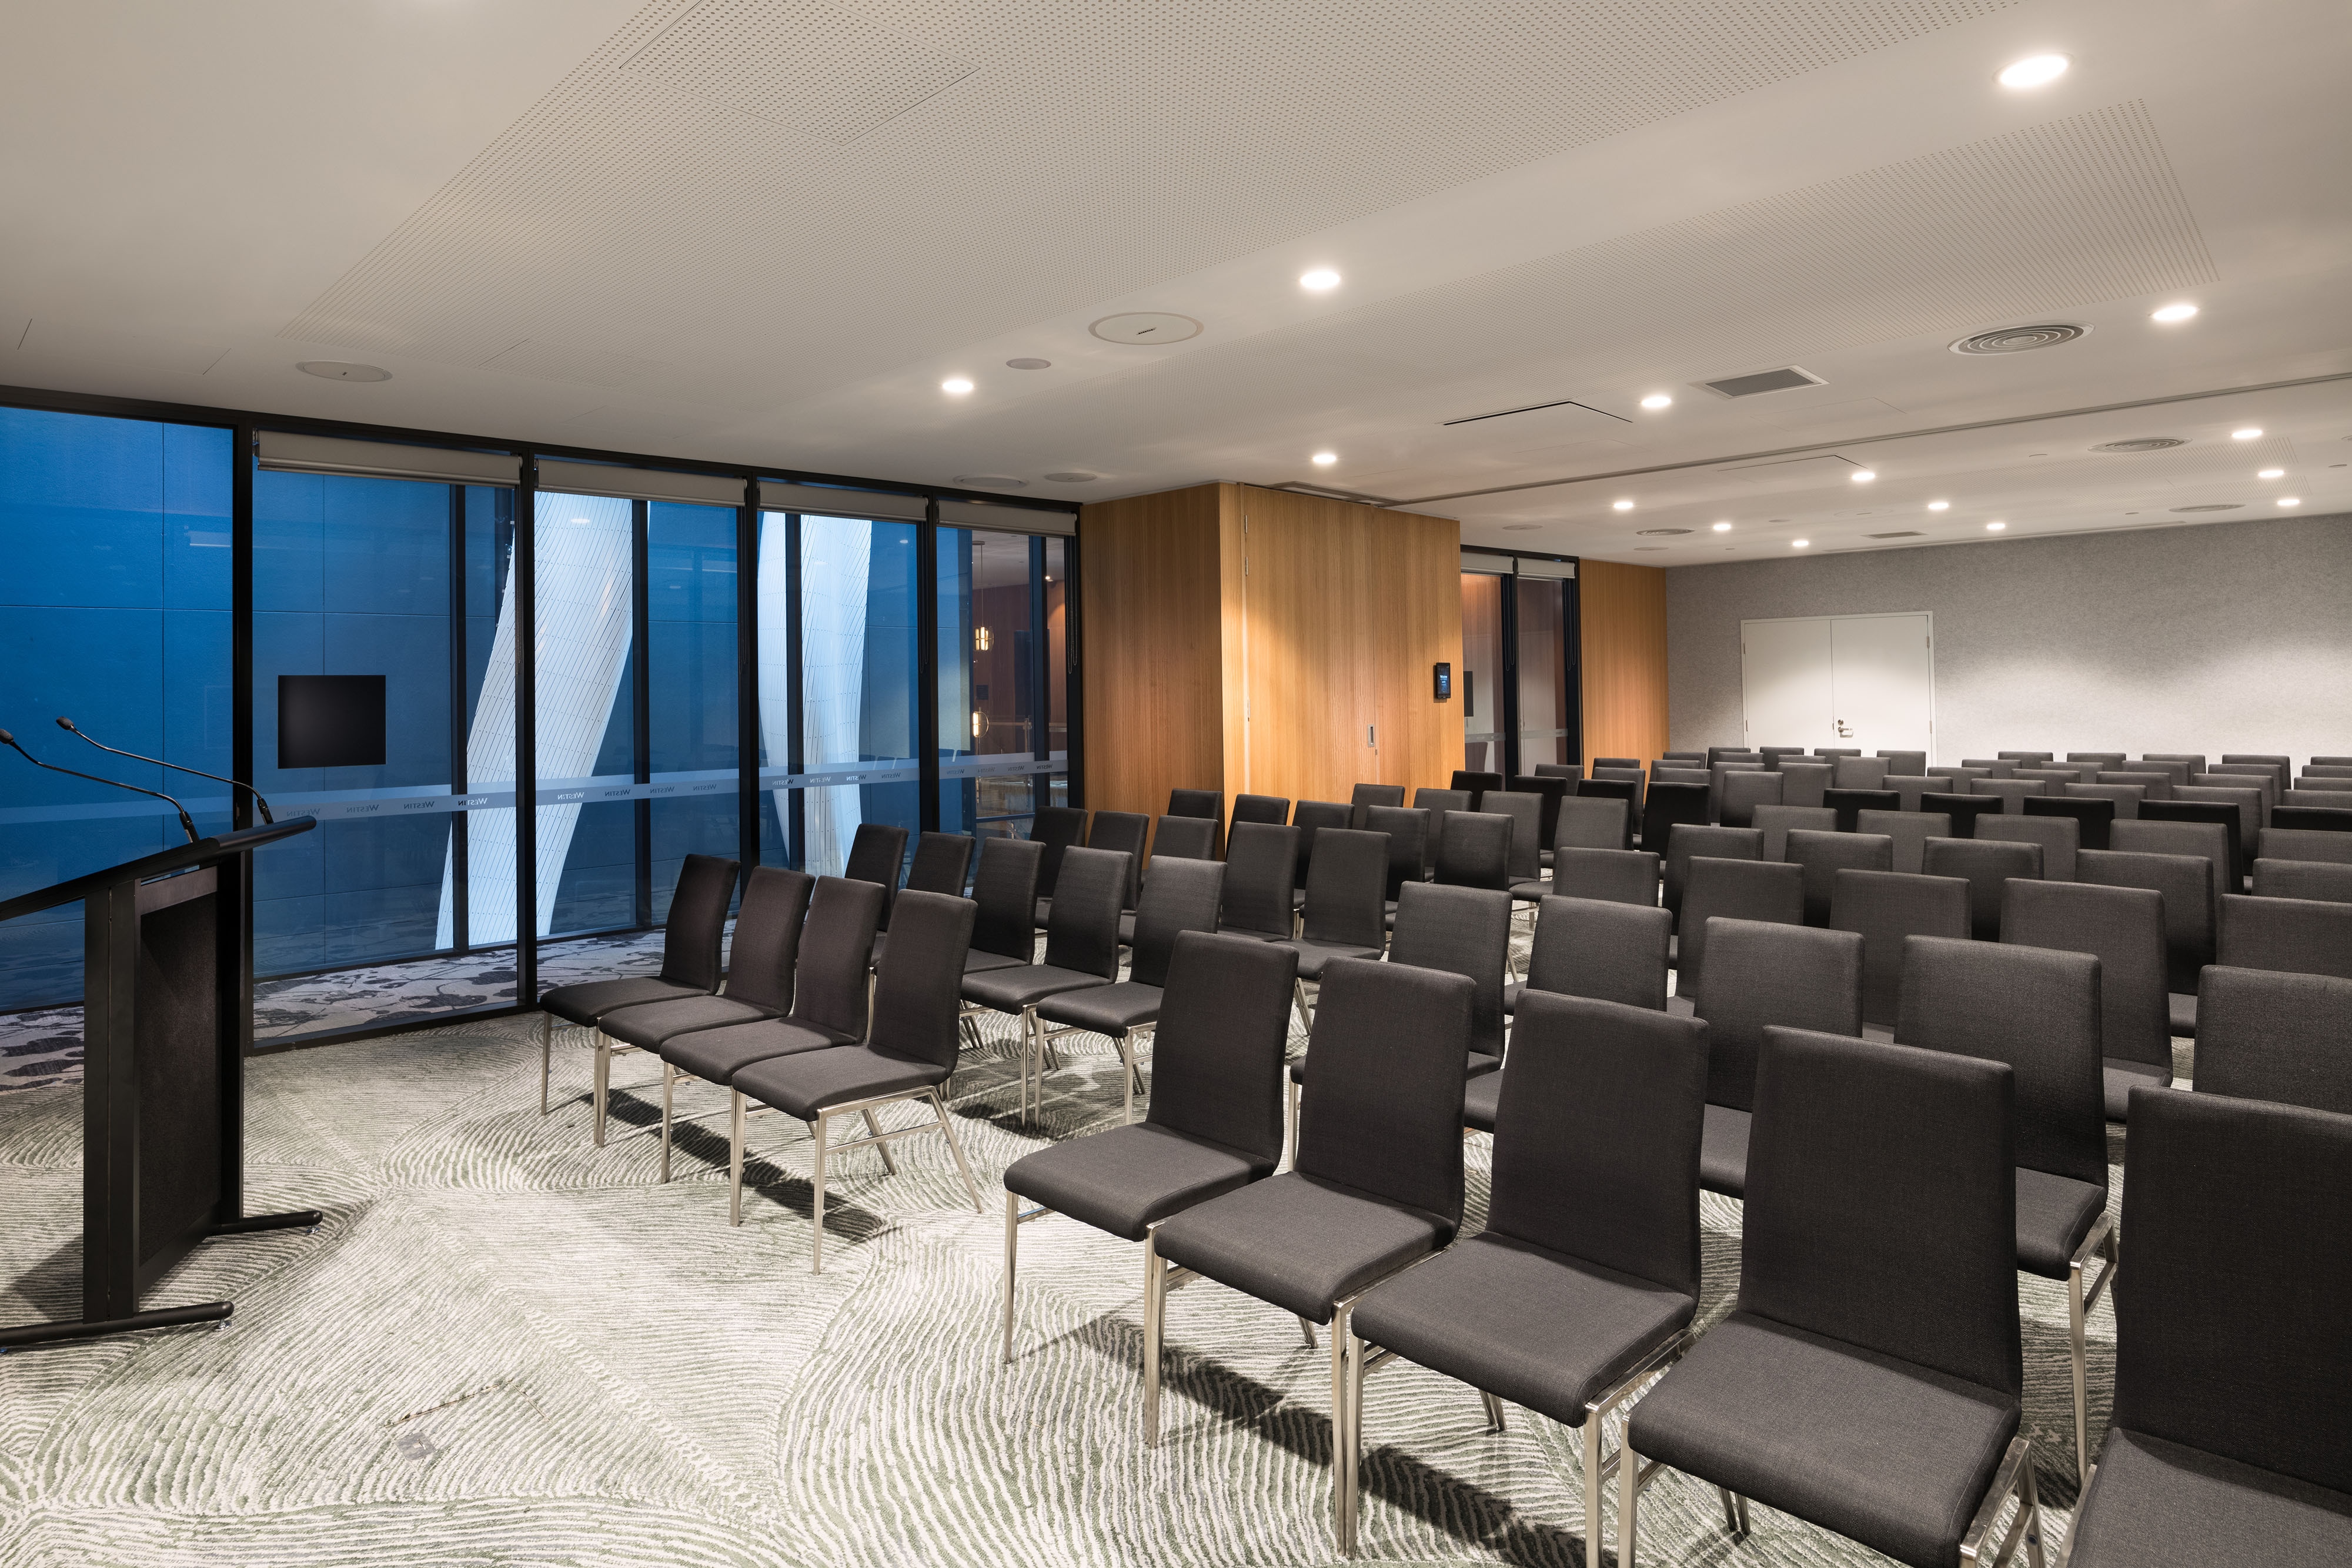 Meeting room with rows of chairs arranged in front of a podium